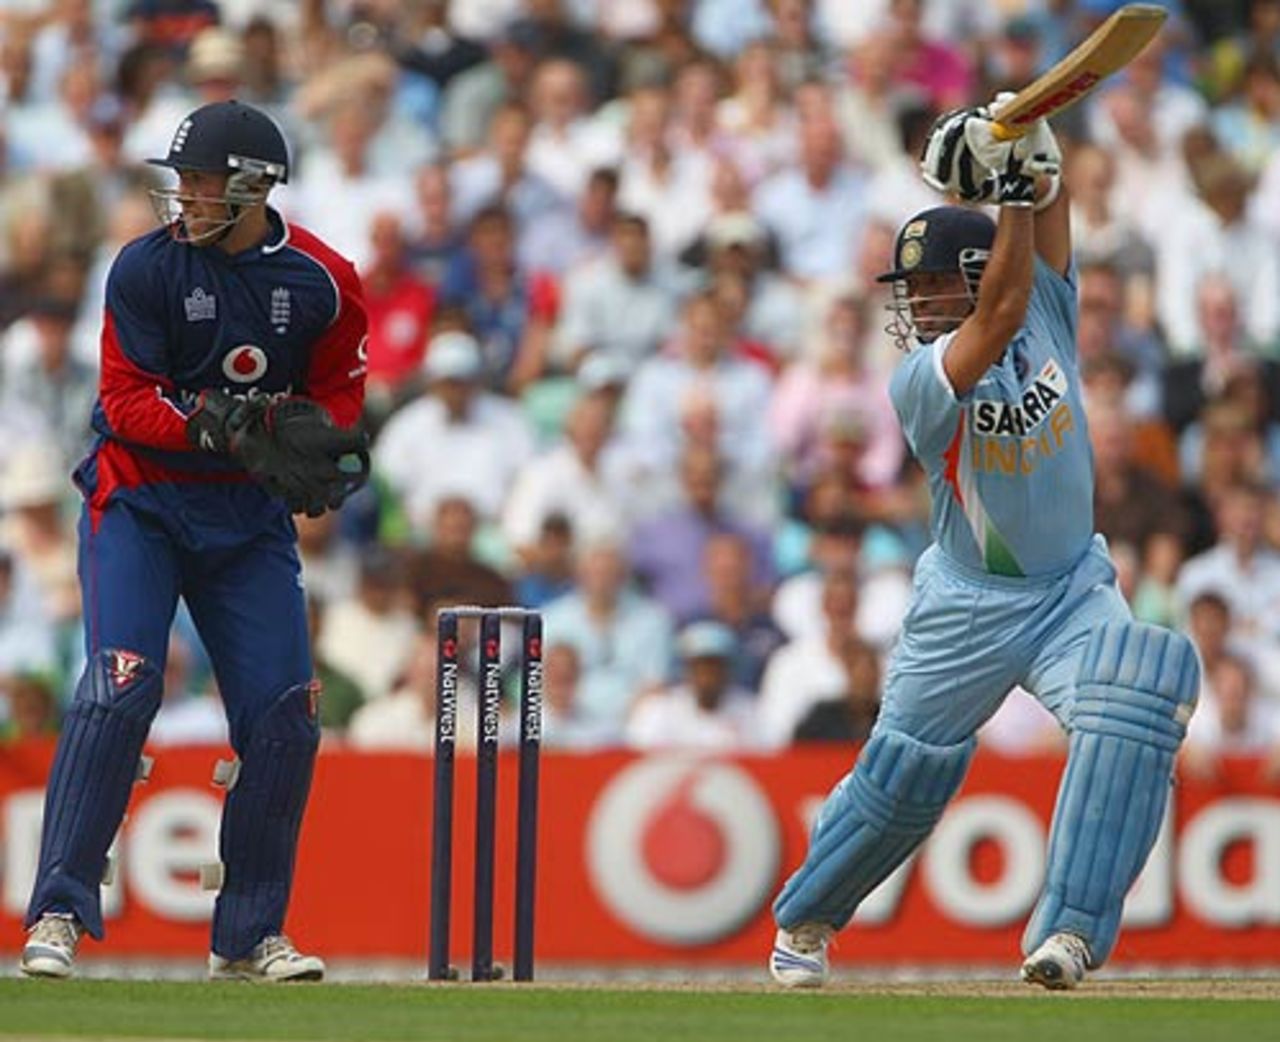 Sachin Tendulkar drives uppishly and finds the gap on the off side, England v India, 6th ODI, The Oval, September 5, 2007